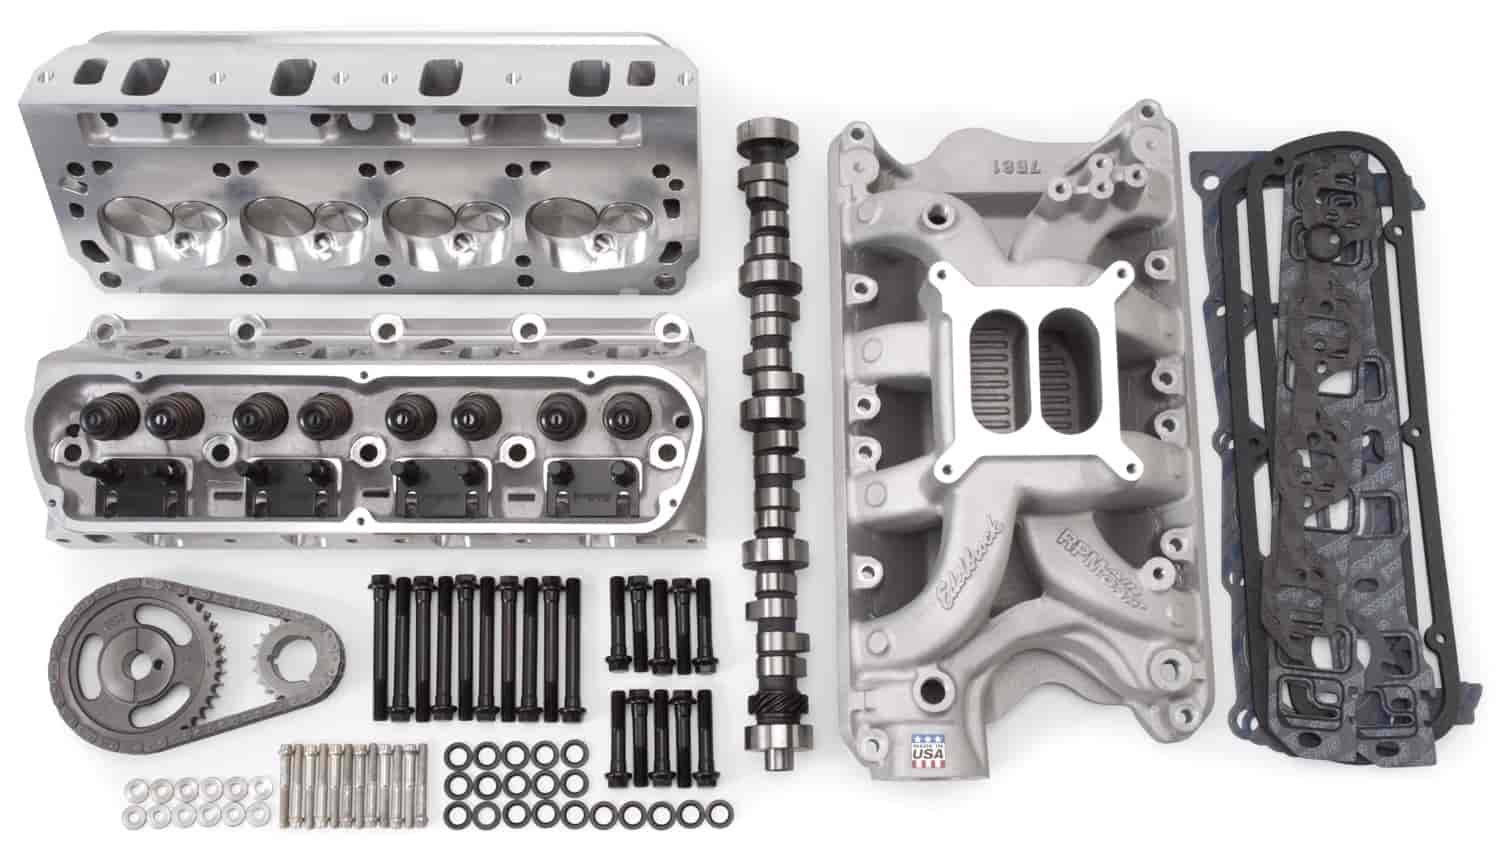 RPM Power Package Top End Kit for 1962-1981 Small Block Ford 289-302 with Endurashine Finish